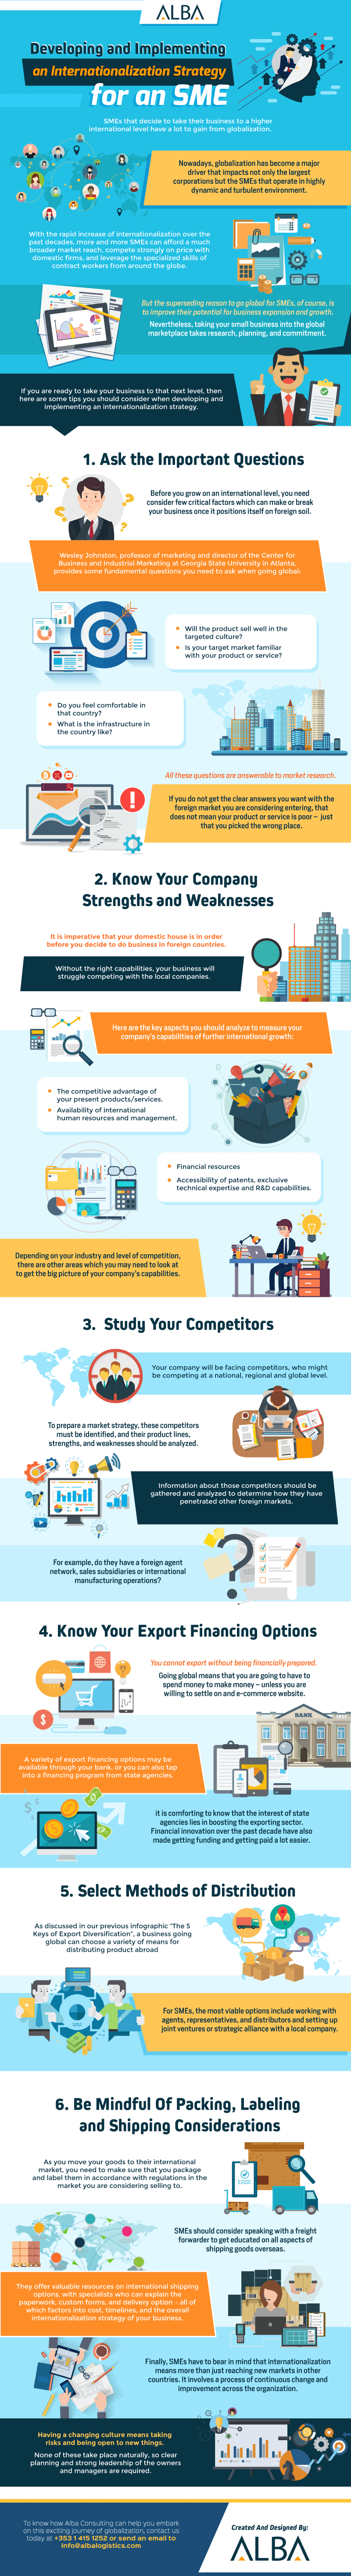 Alba Consulting provides tips on how SMEs can develop and implement an internationalization strategy